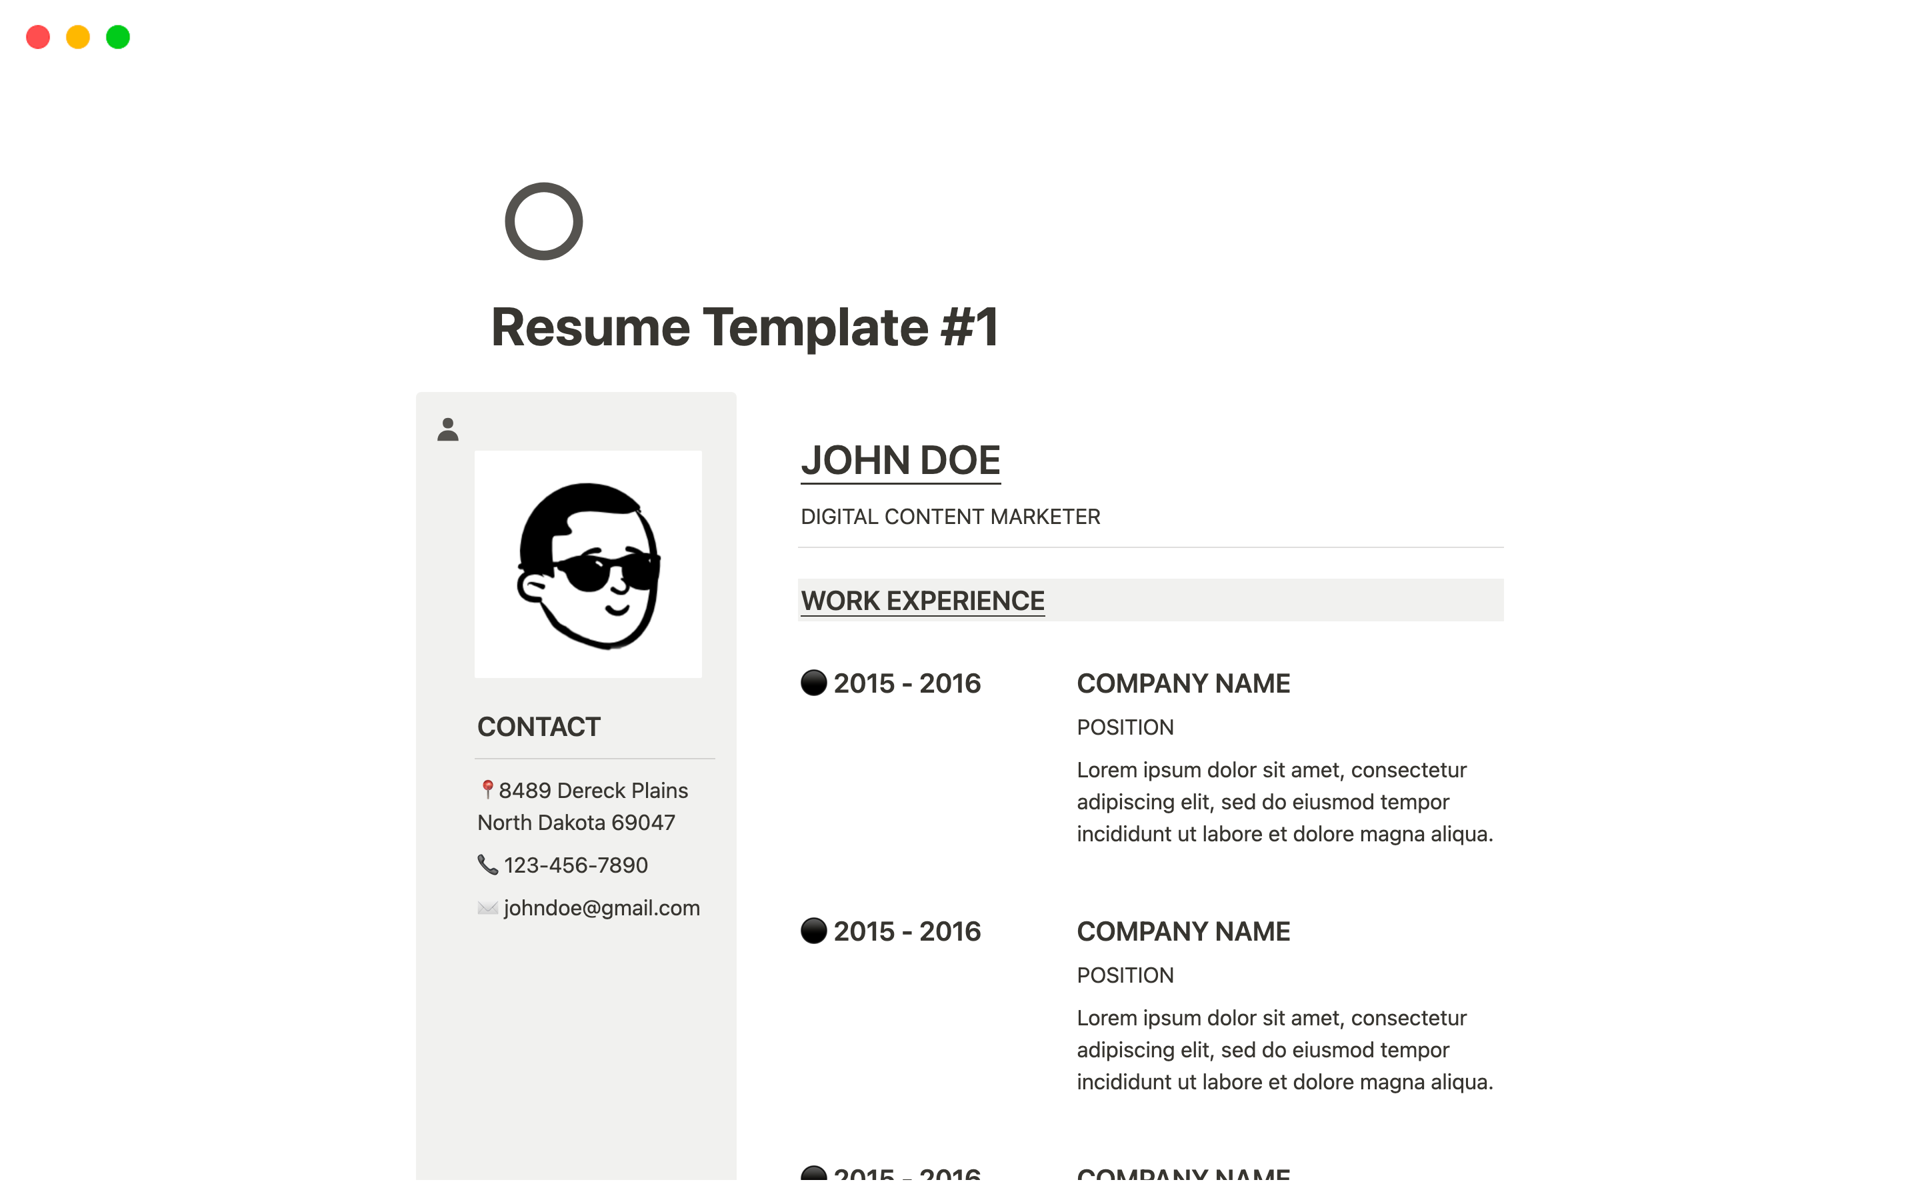 A template preview for Resume Bundle